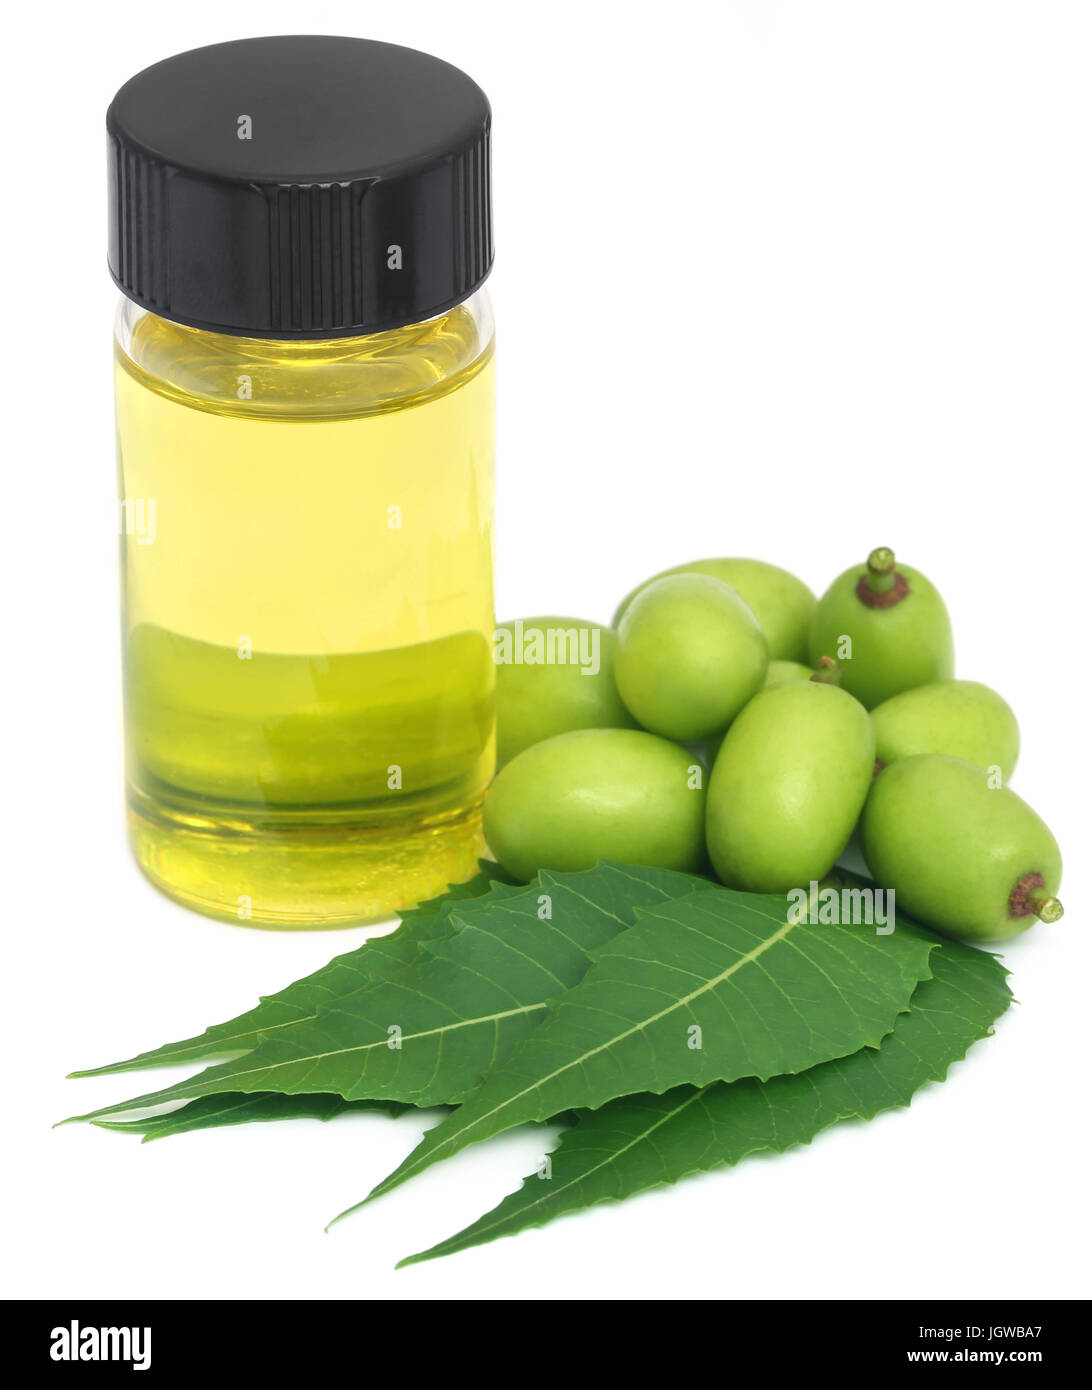 Medicinal neem leaves and fruits with essential oil over white background Stock Photo